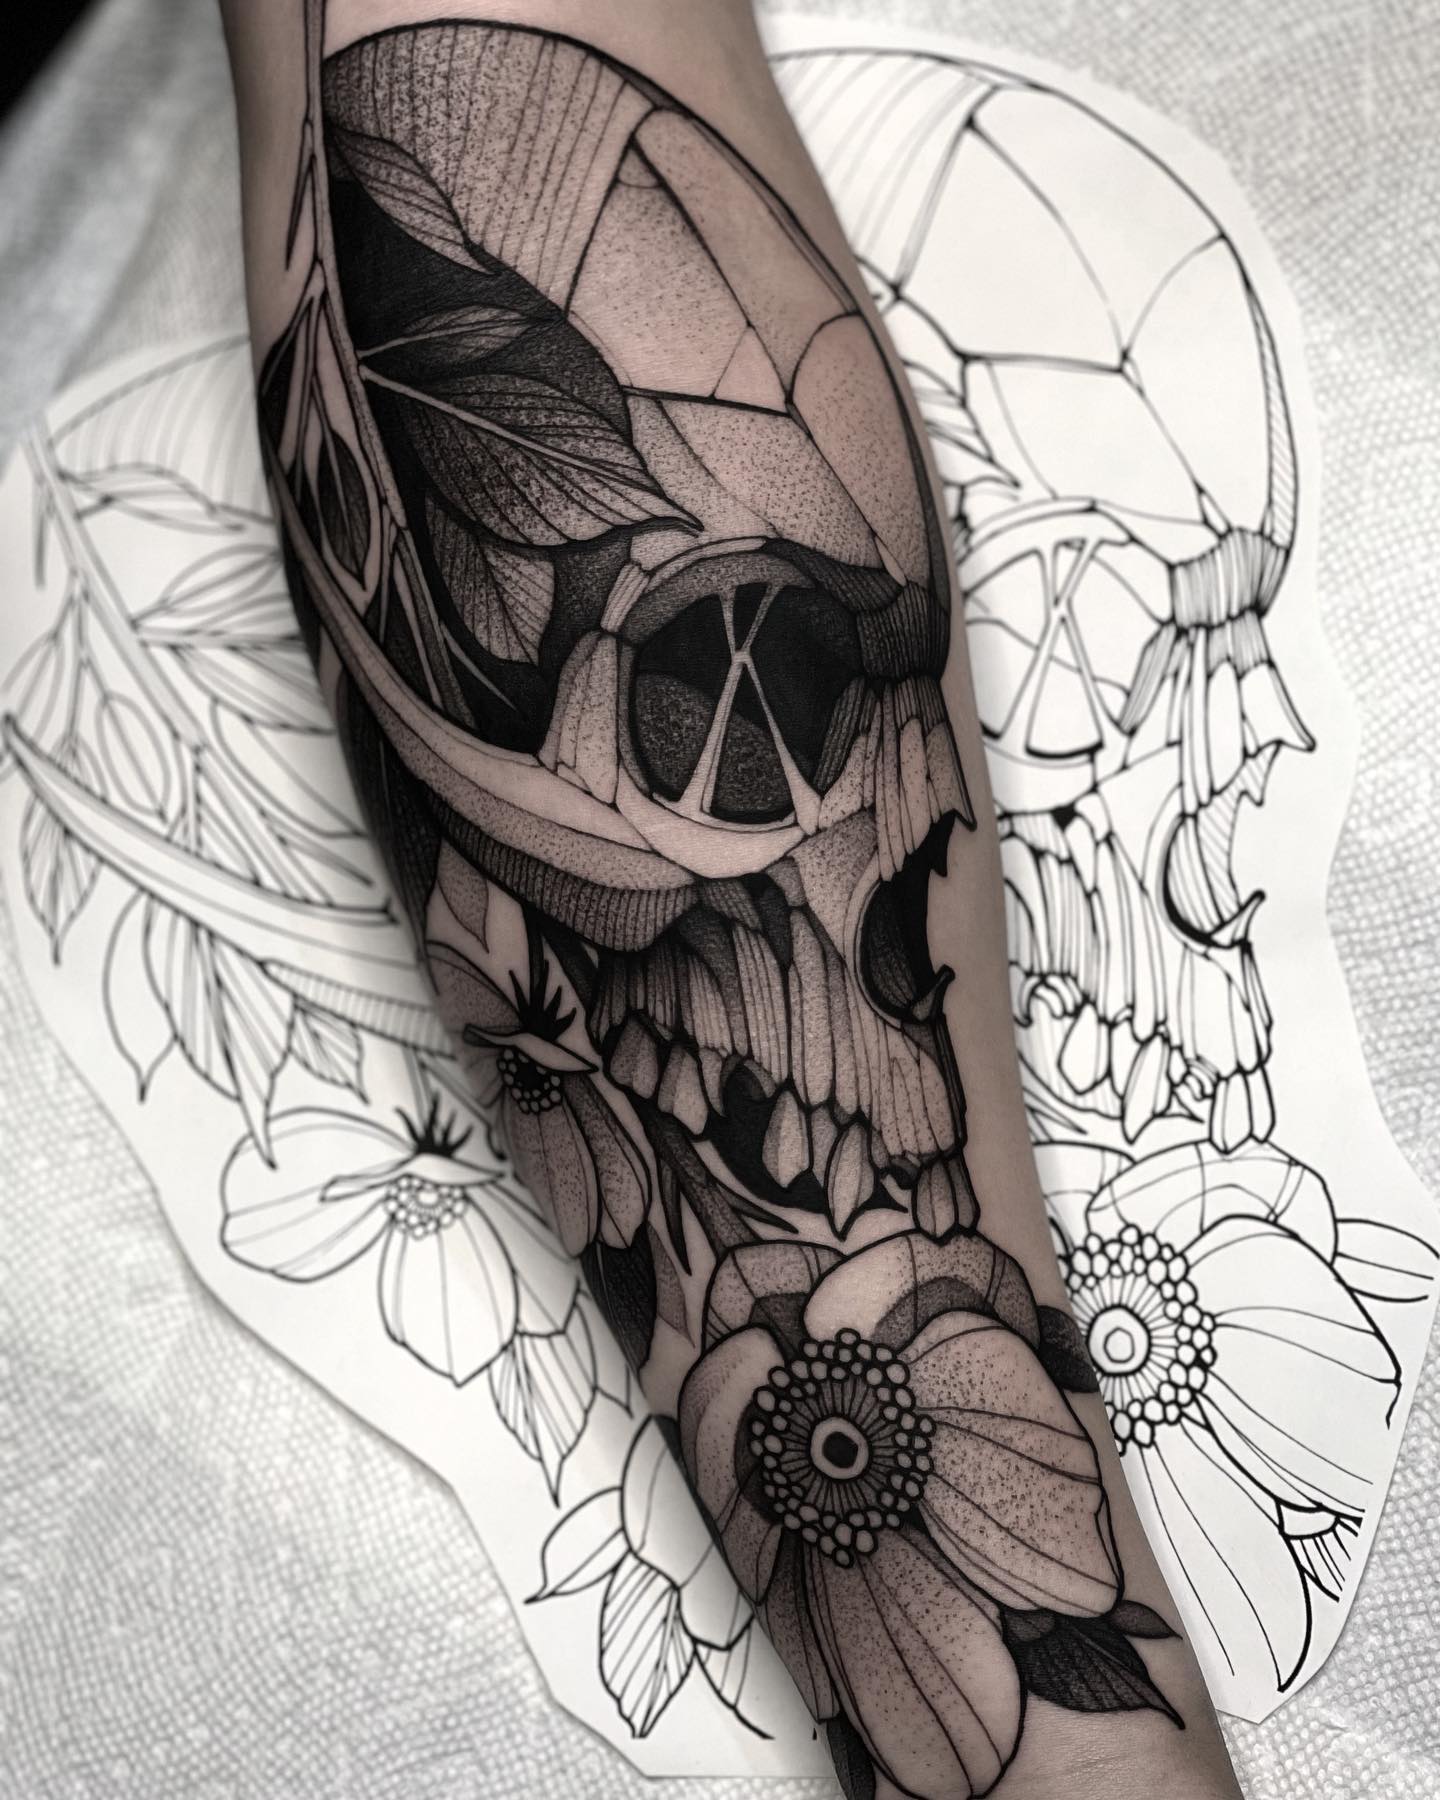 Thanks to this tattoo, you will stand out in everyplace. The reason is nothing is more gorgeous than a skull tattoo.